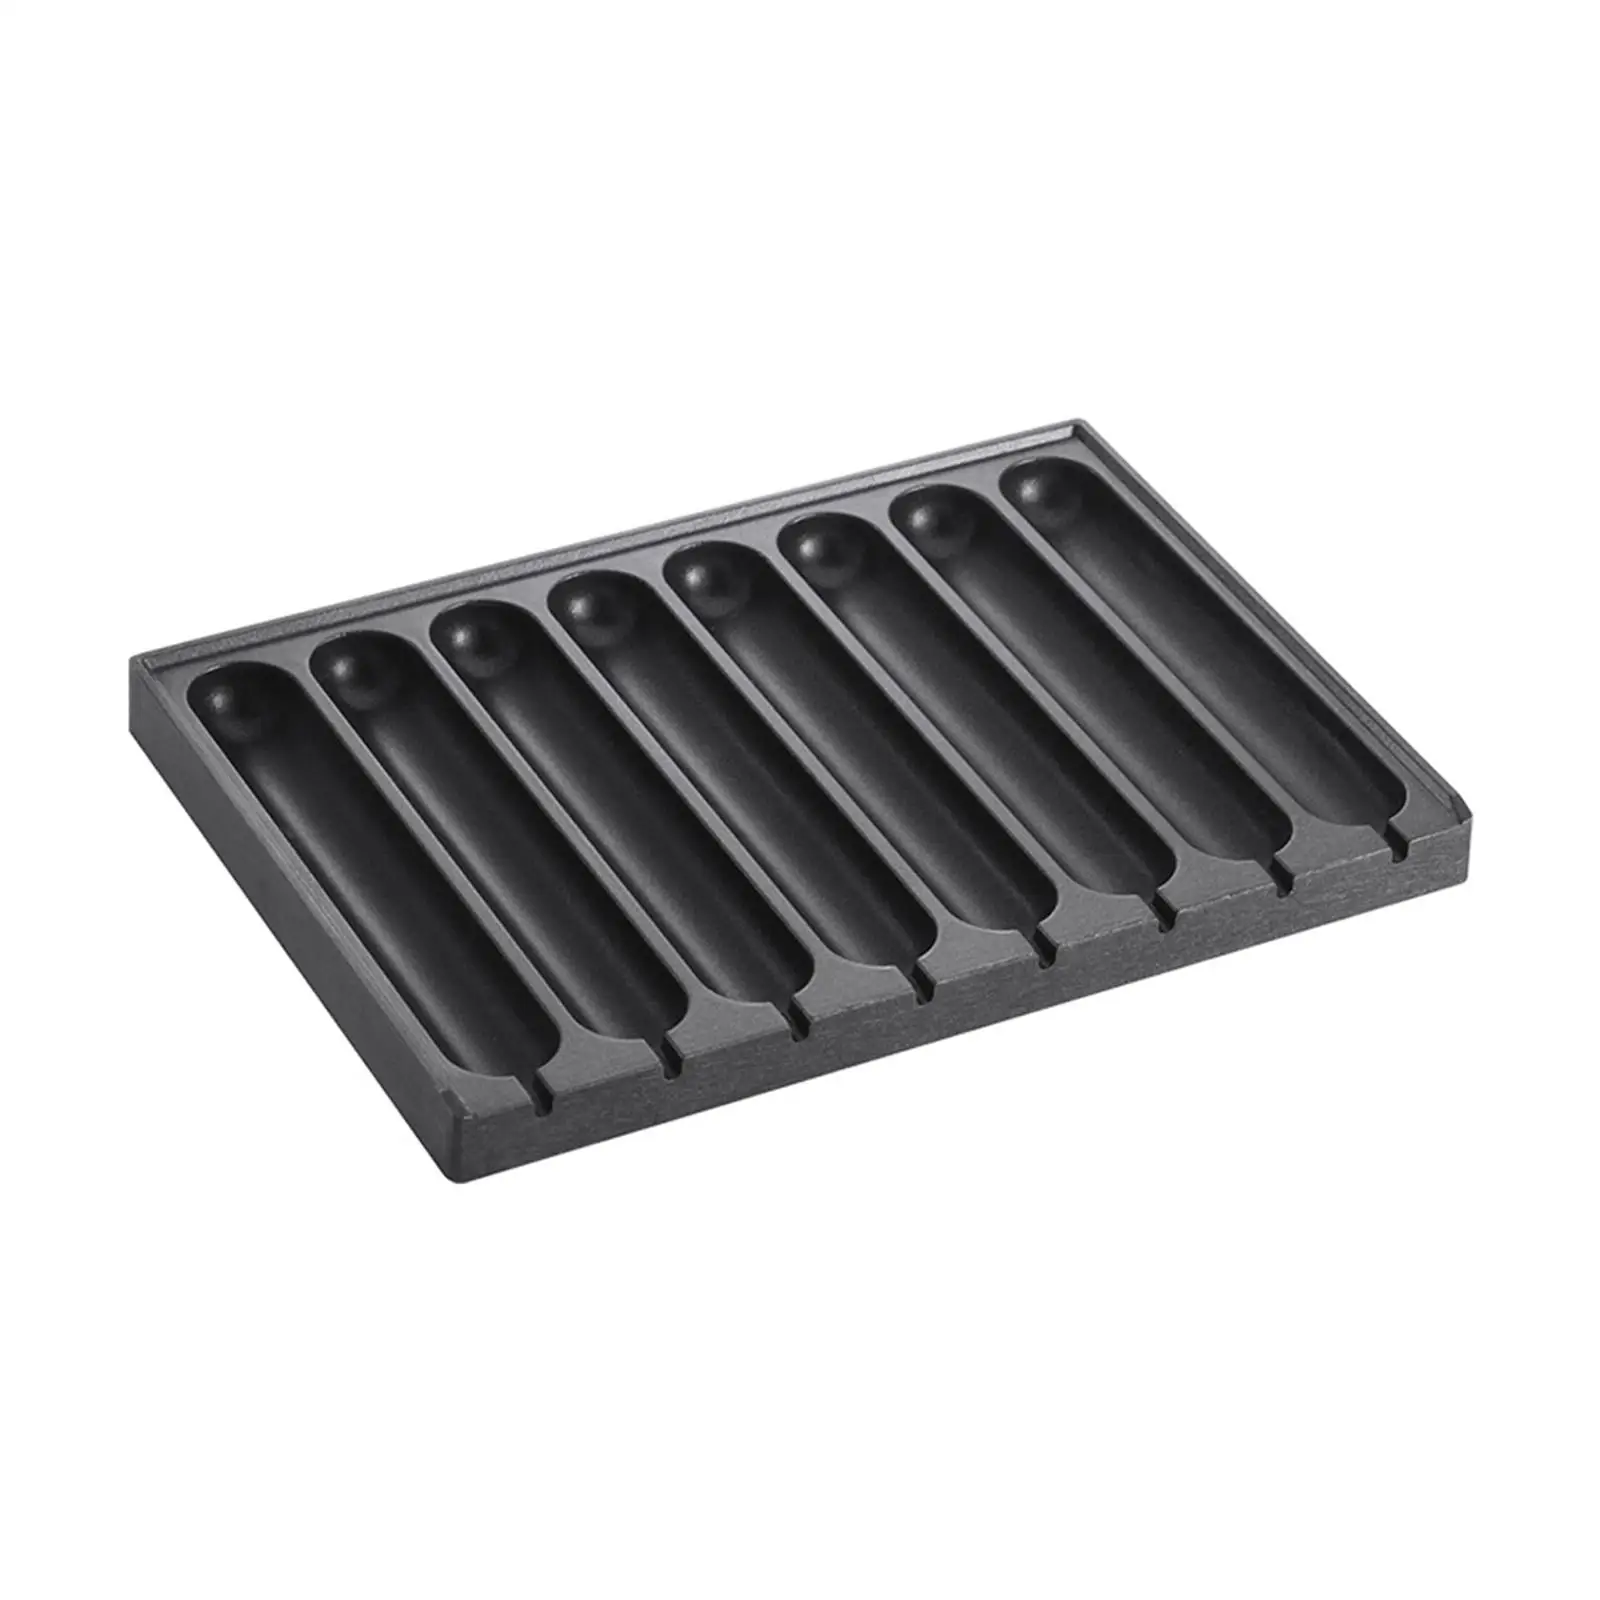 8 Grids Sausage Grilling Pan Nonstick Corn for Baking Breakfast